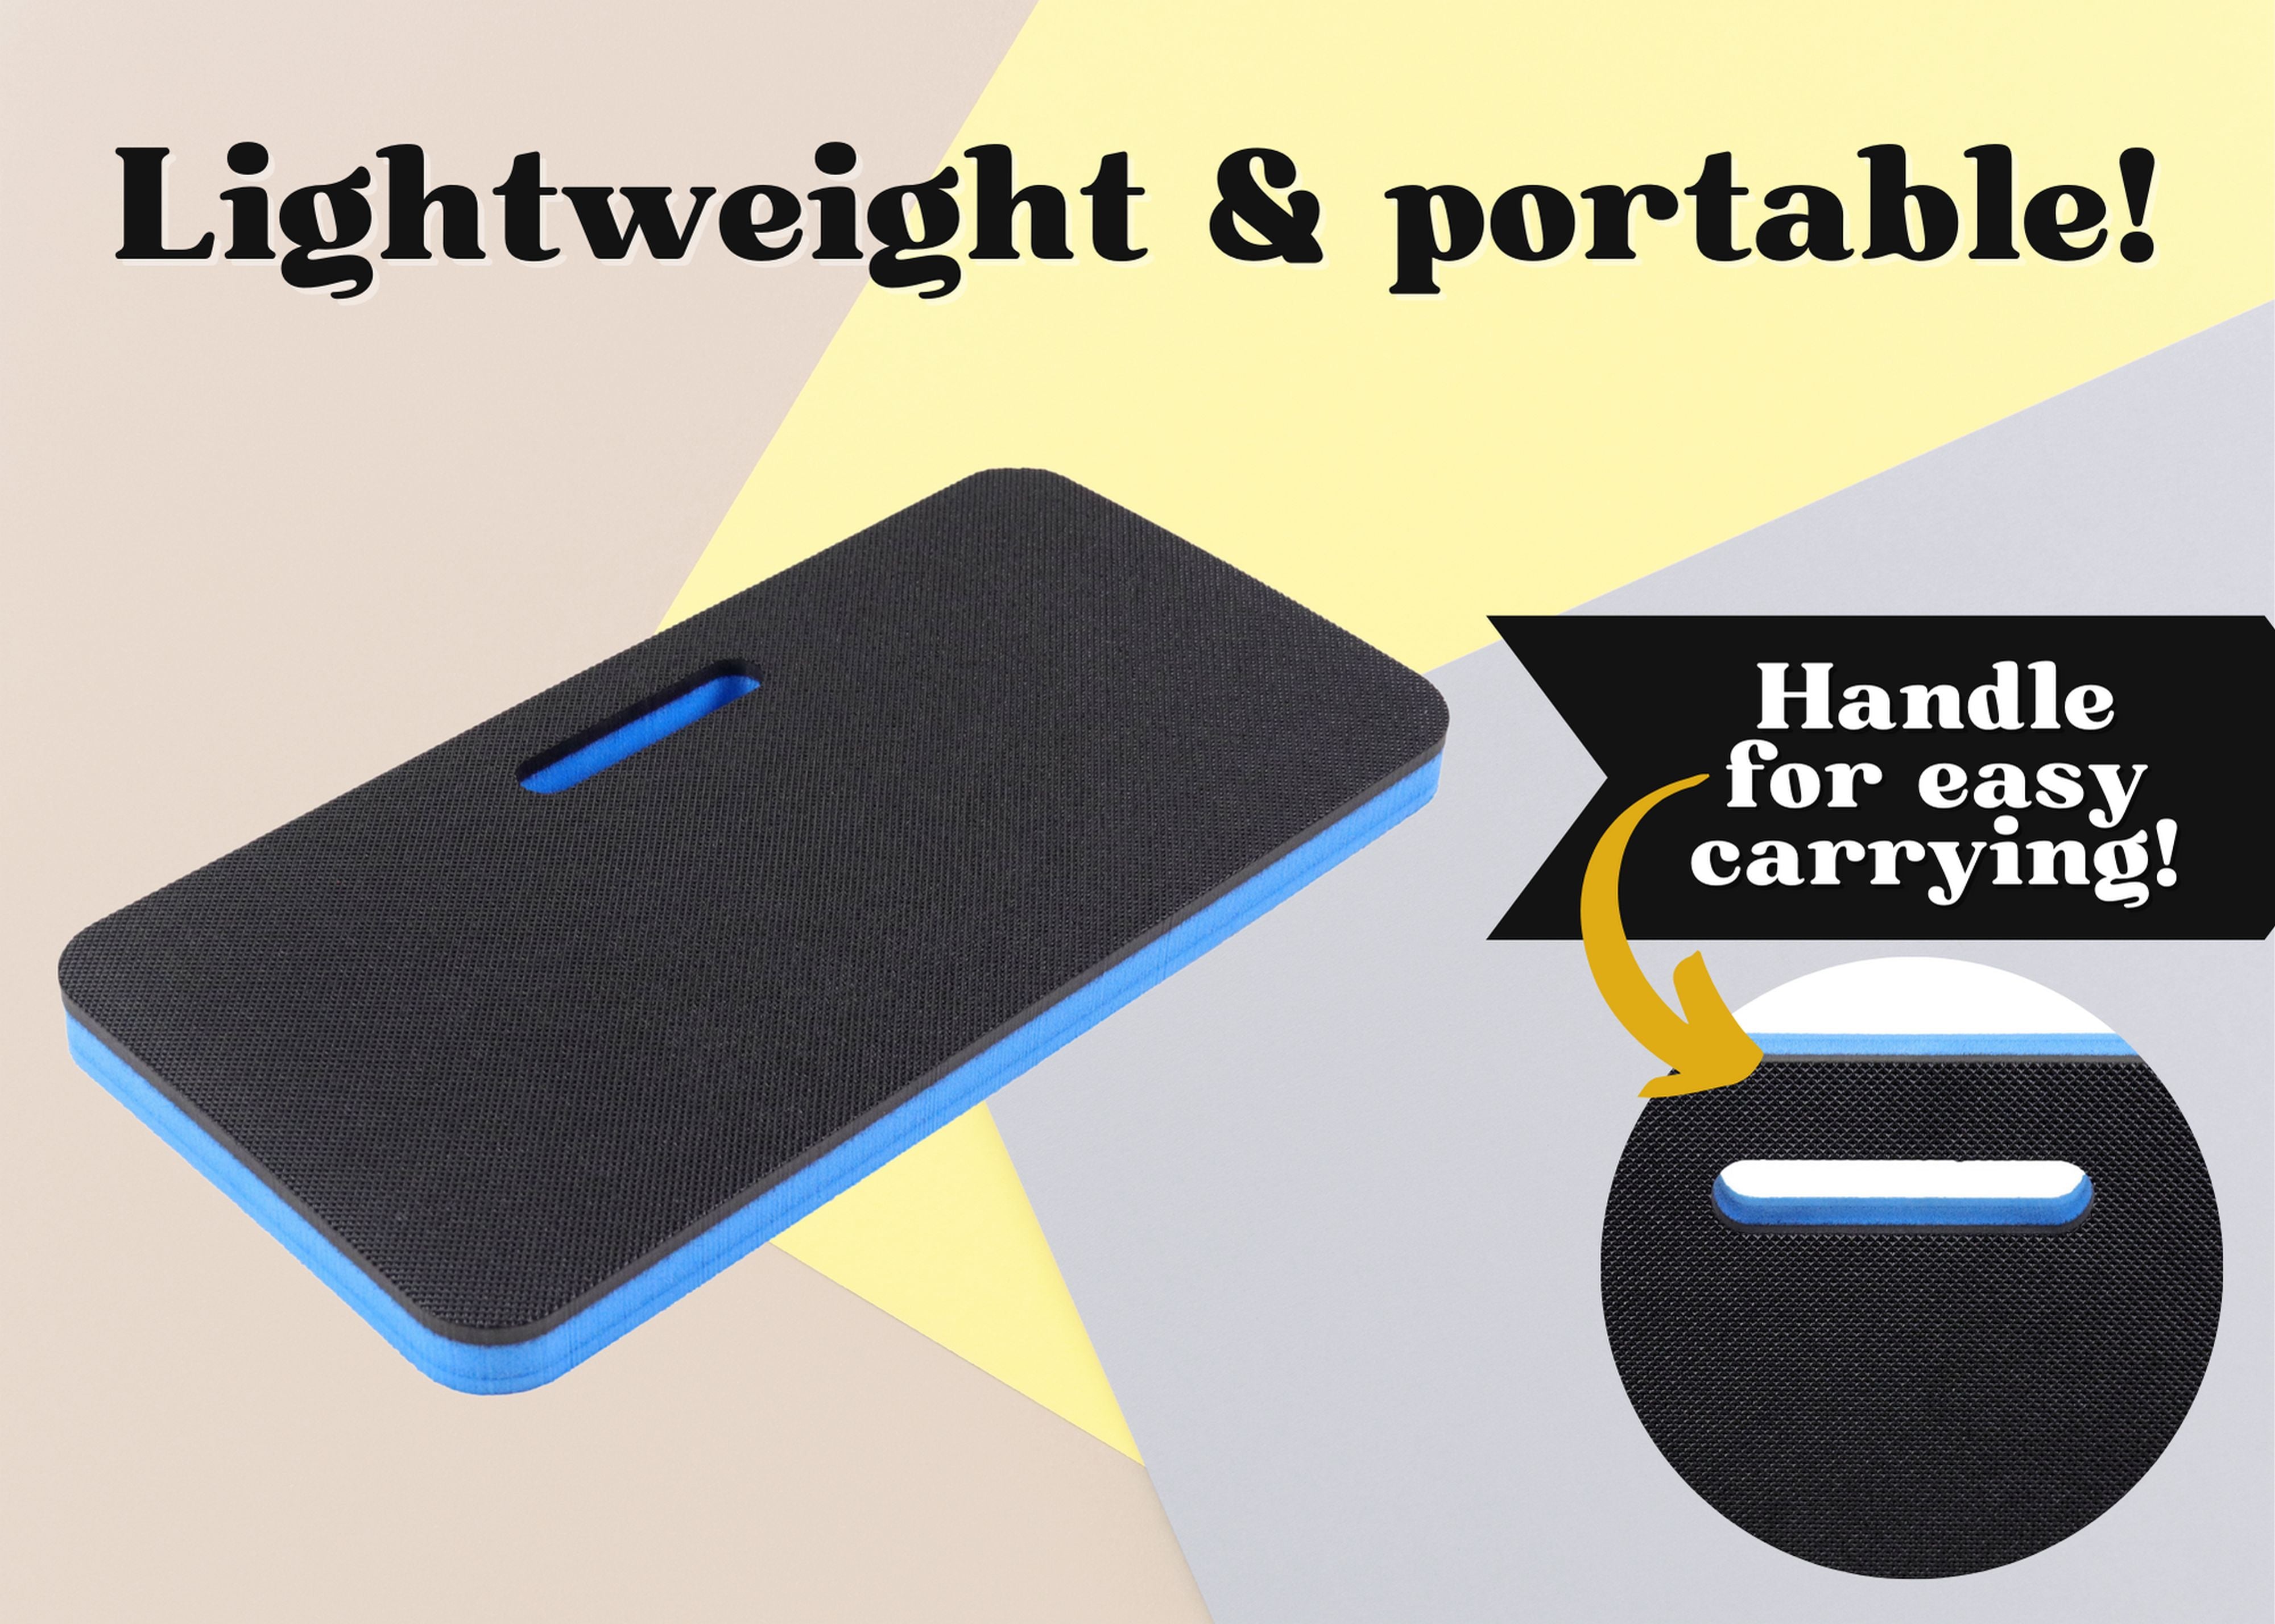 Portable Knee Cushion Blue and Black for Home Garden Work Automotive Workshop and More Durable Thick Comfortable High Density Waterproof Foam 16 x 8 Inches Kneeling Pad